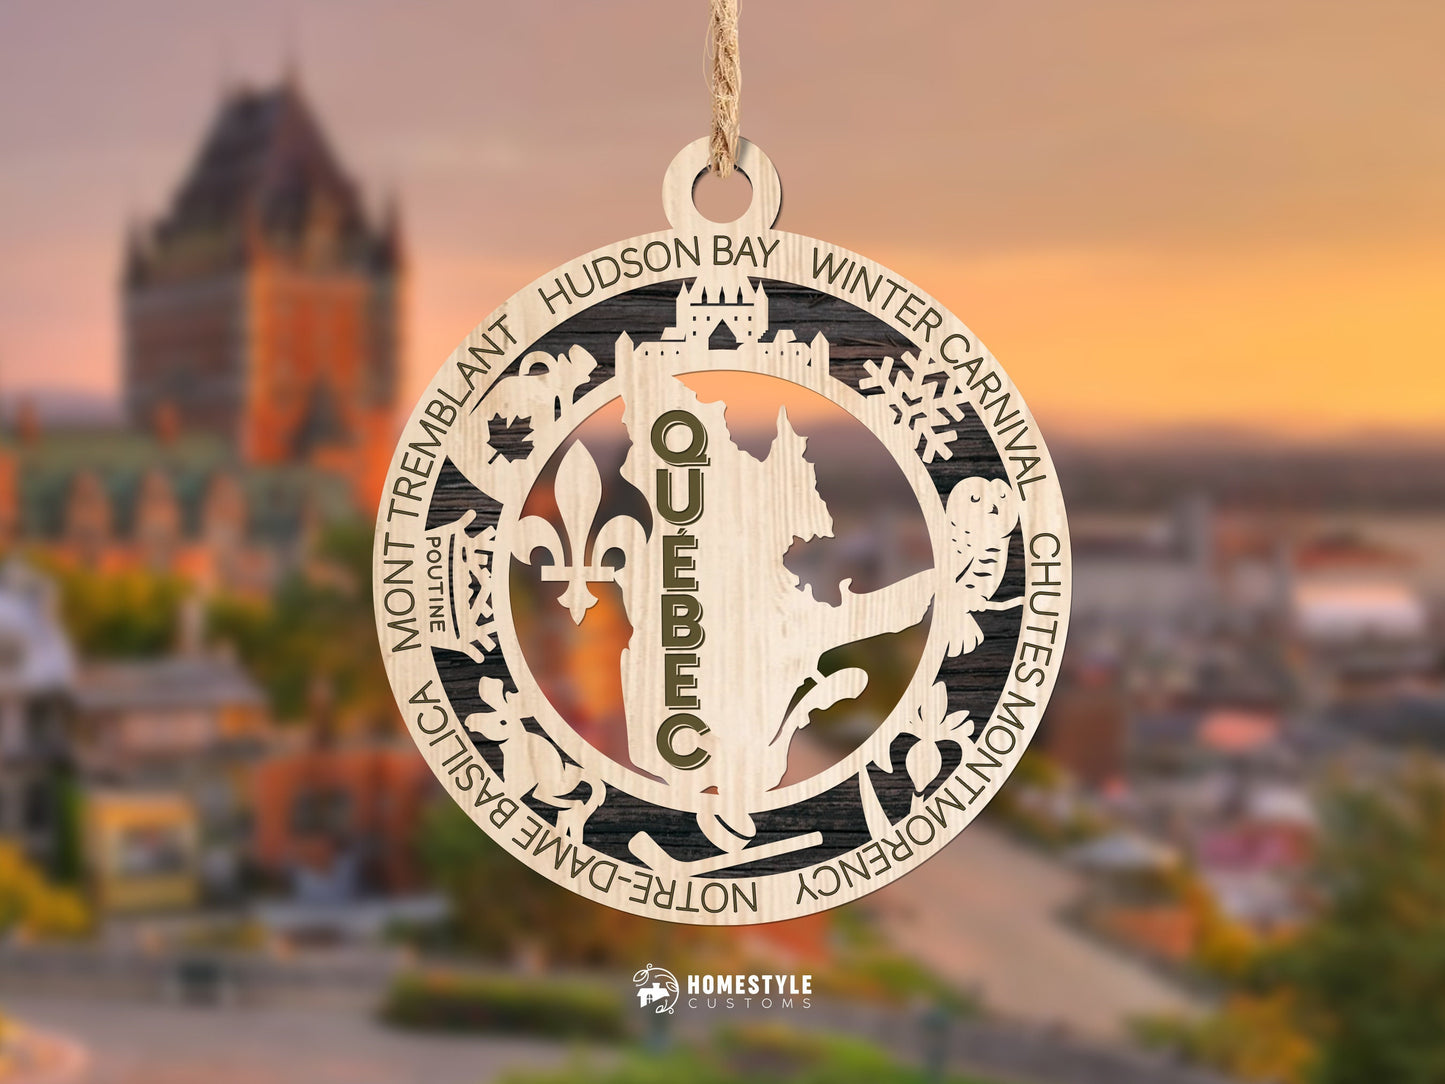 Quebec Provincial Ornament - Canada - SVG File Download - Sized for Glowforge - Laser Ready Digital Files